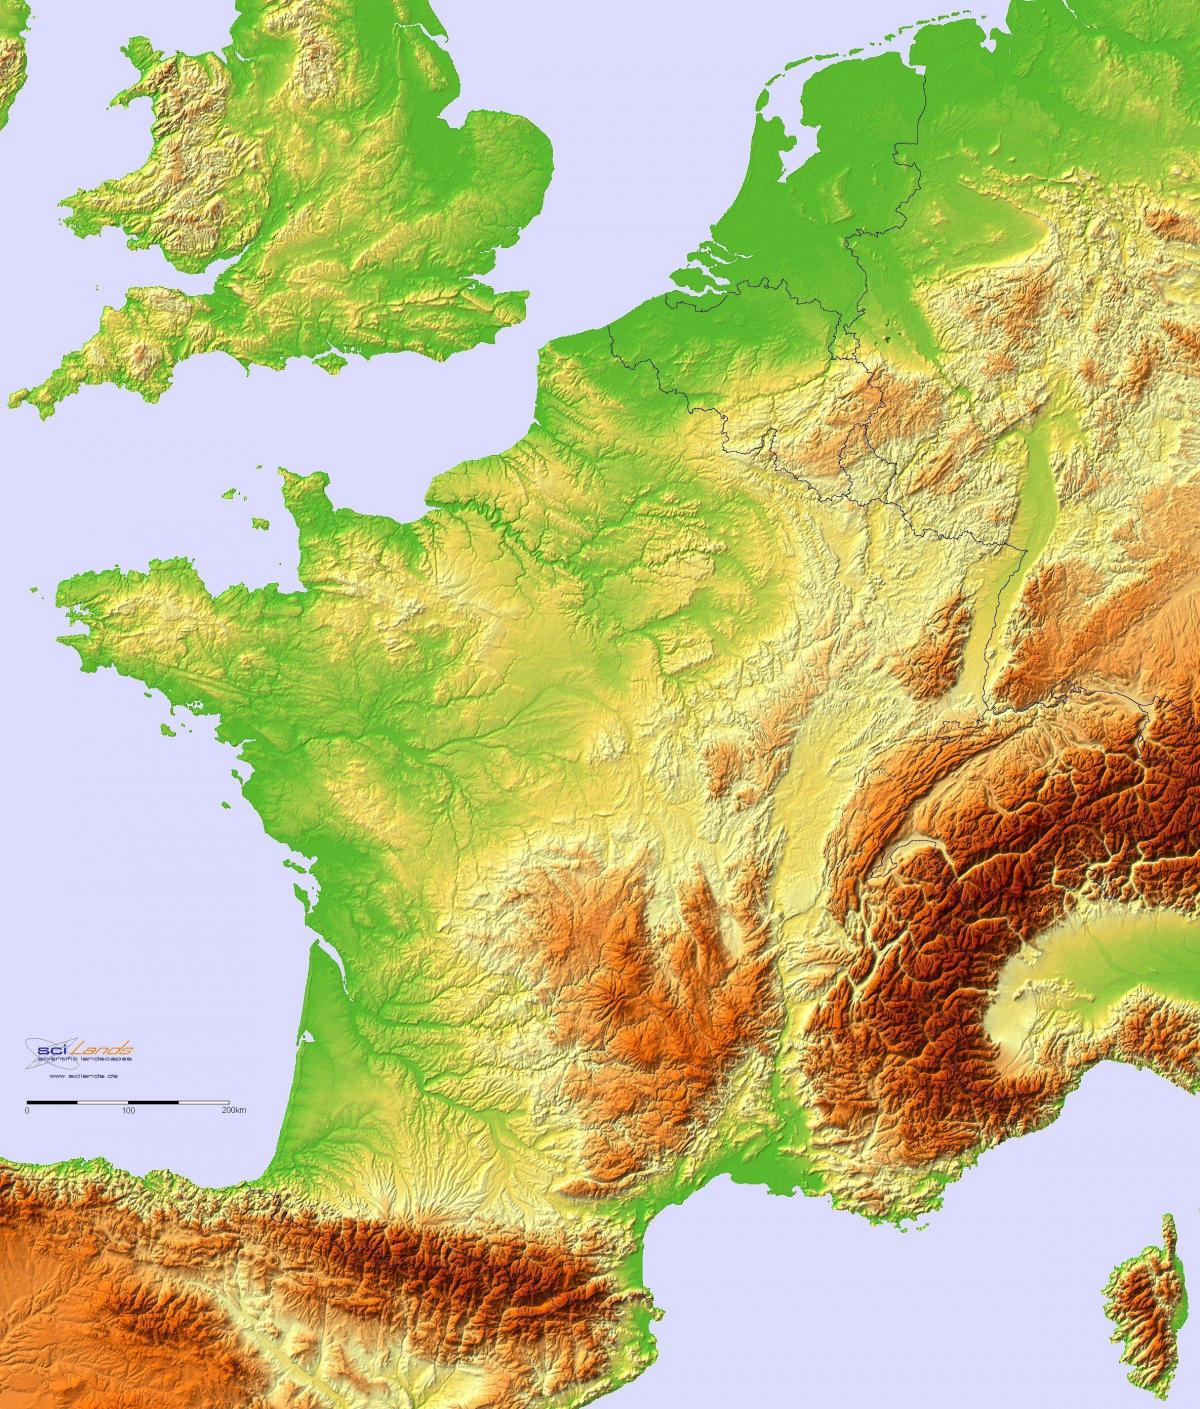 Topographical map of France